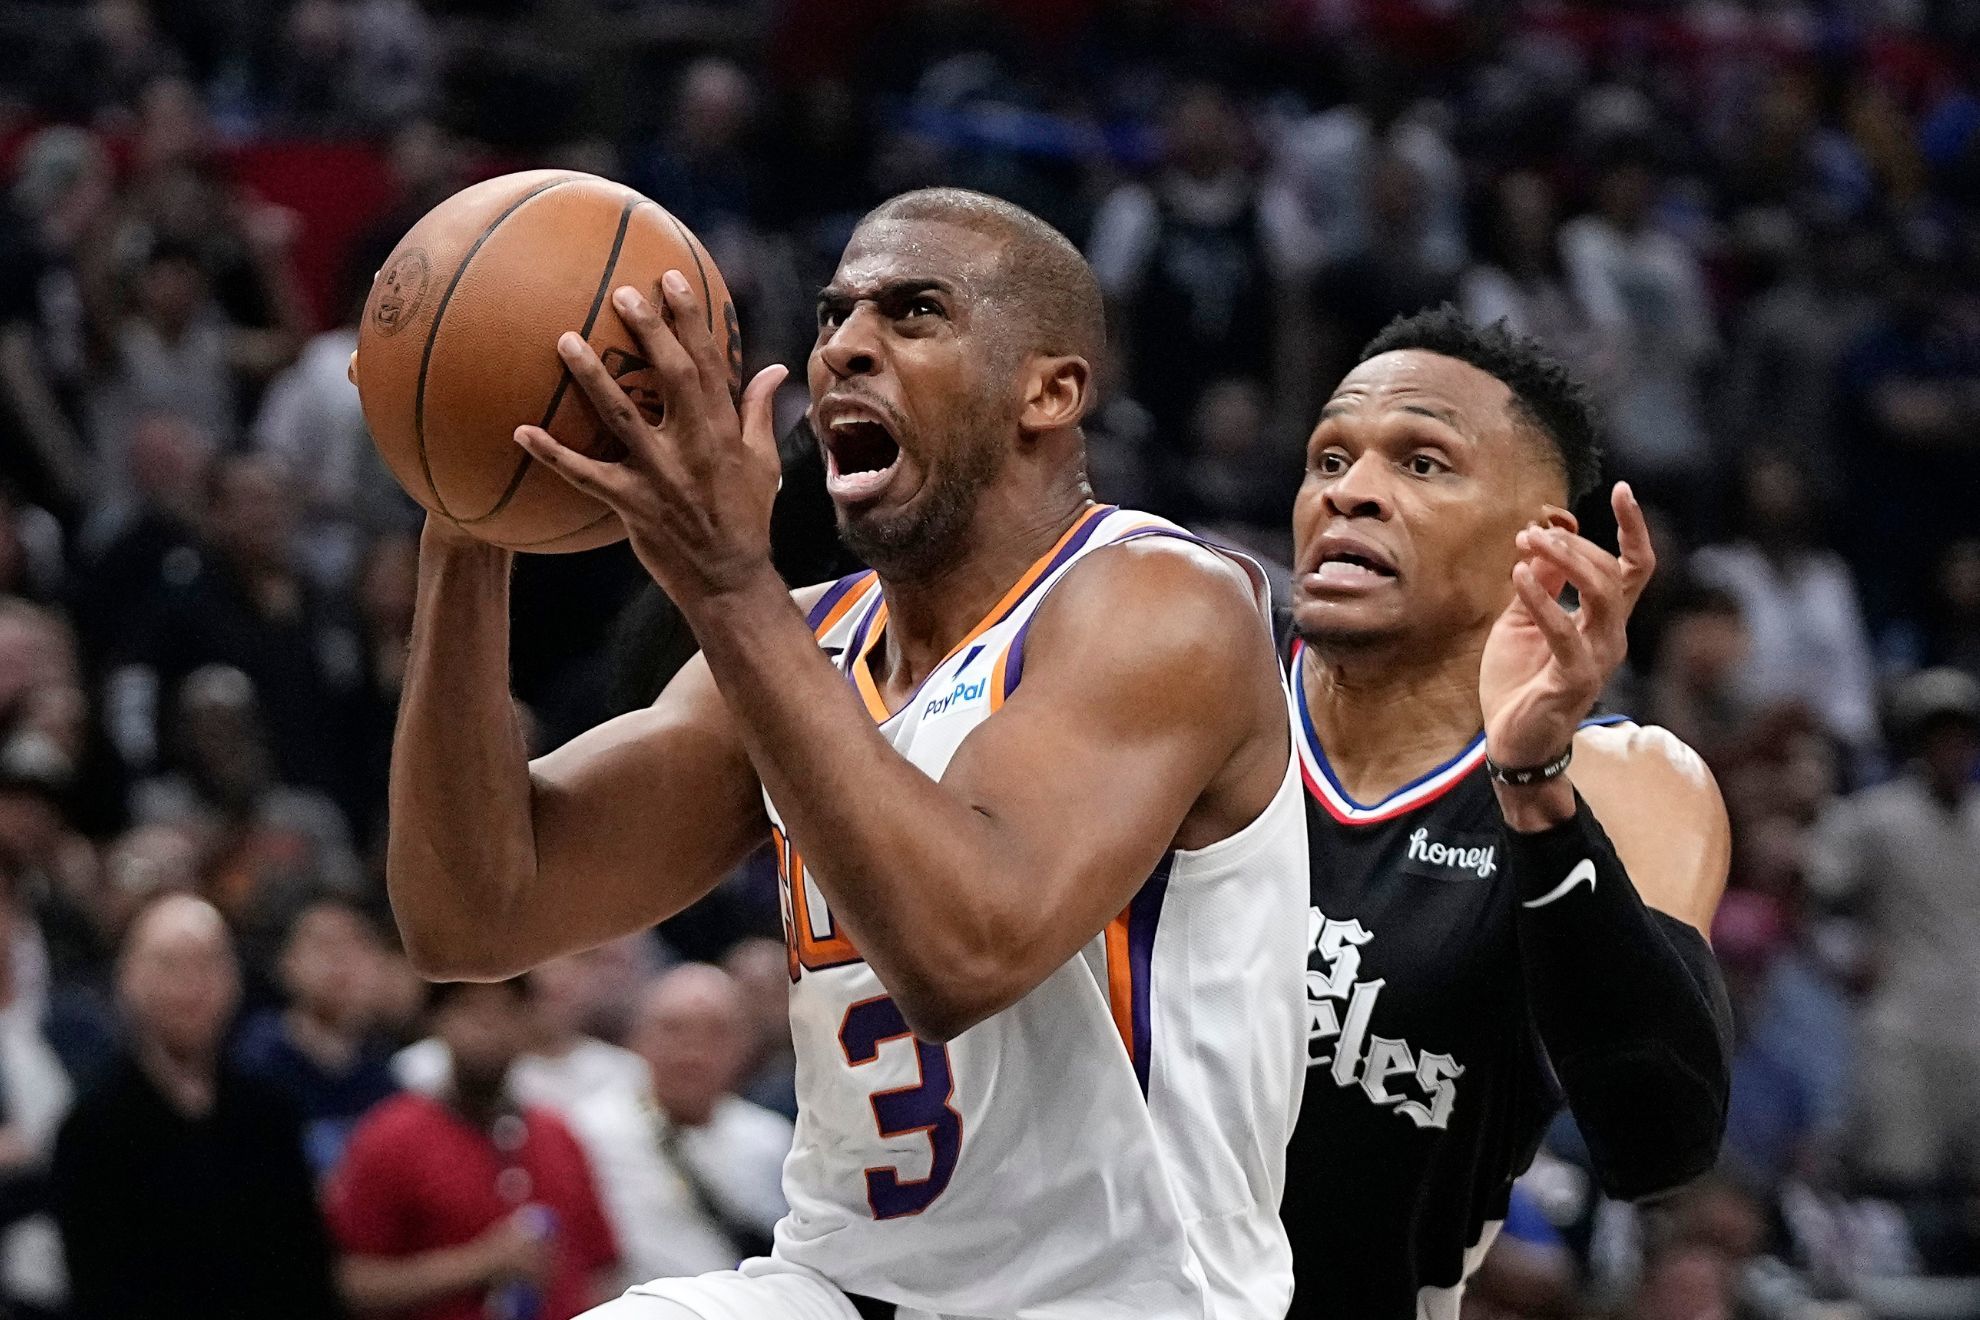 Russell Westbrooks 37 points not enough for Clippers to tie series vs. Suns